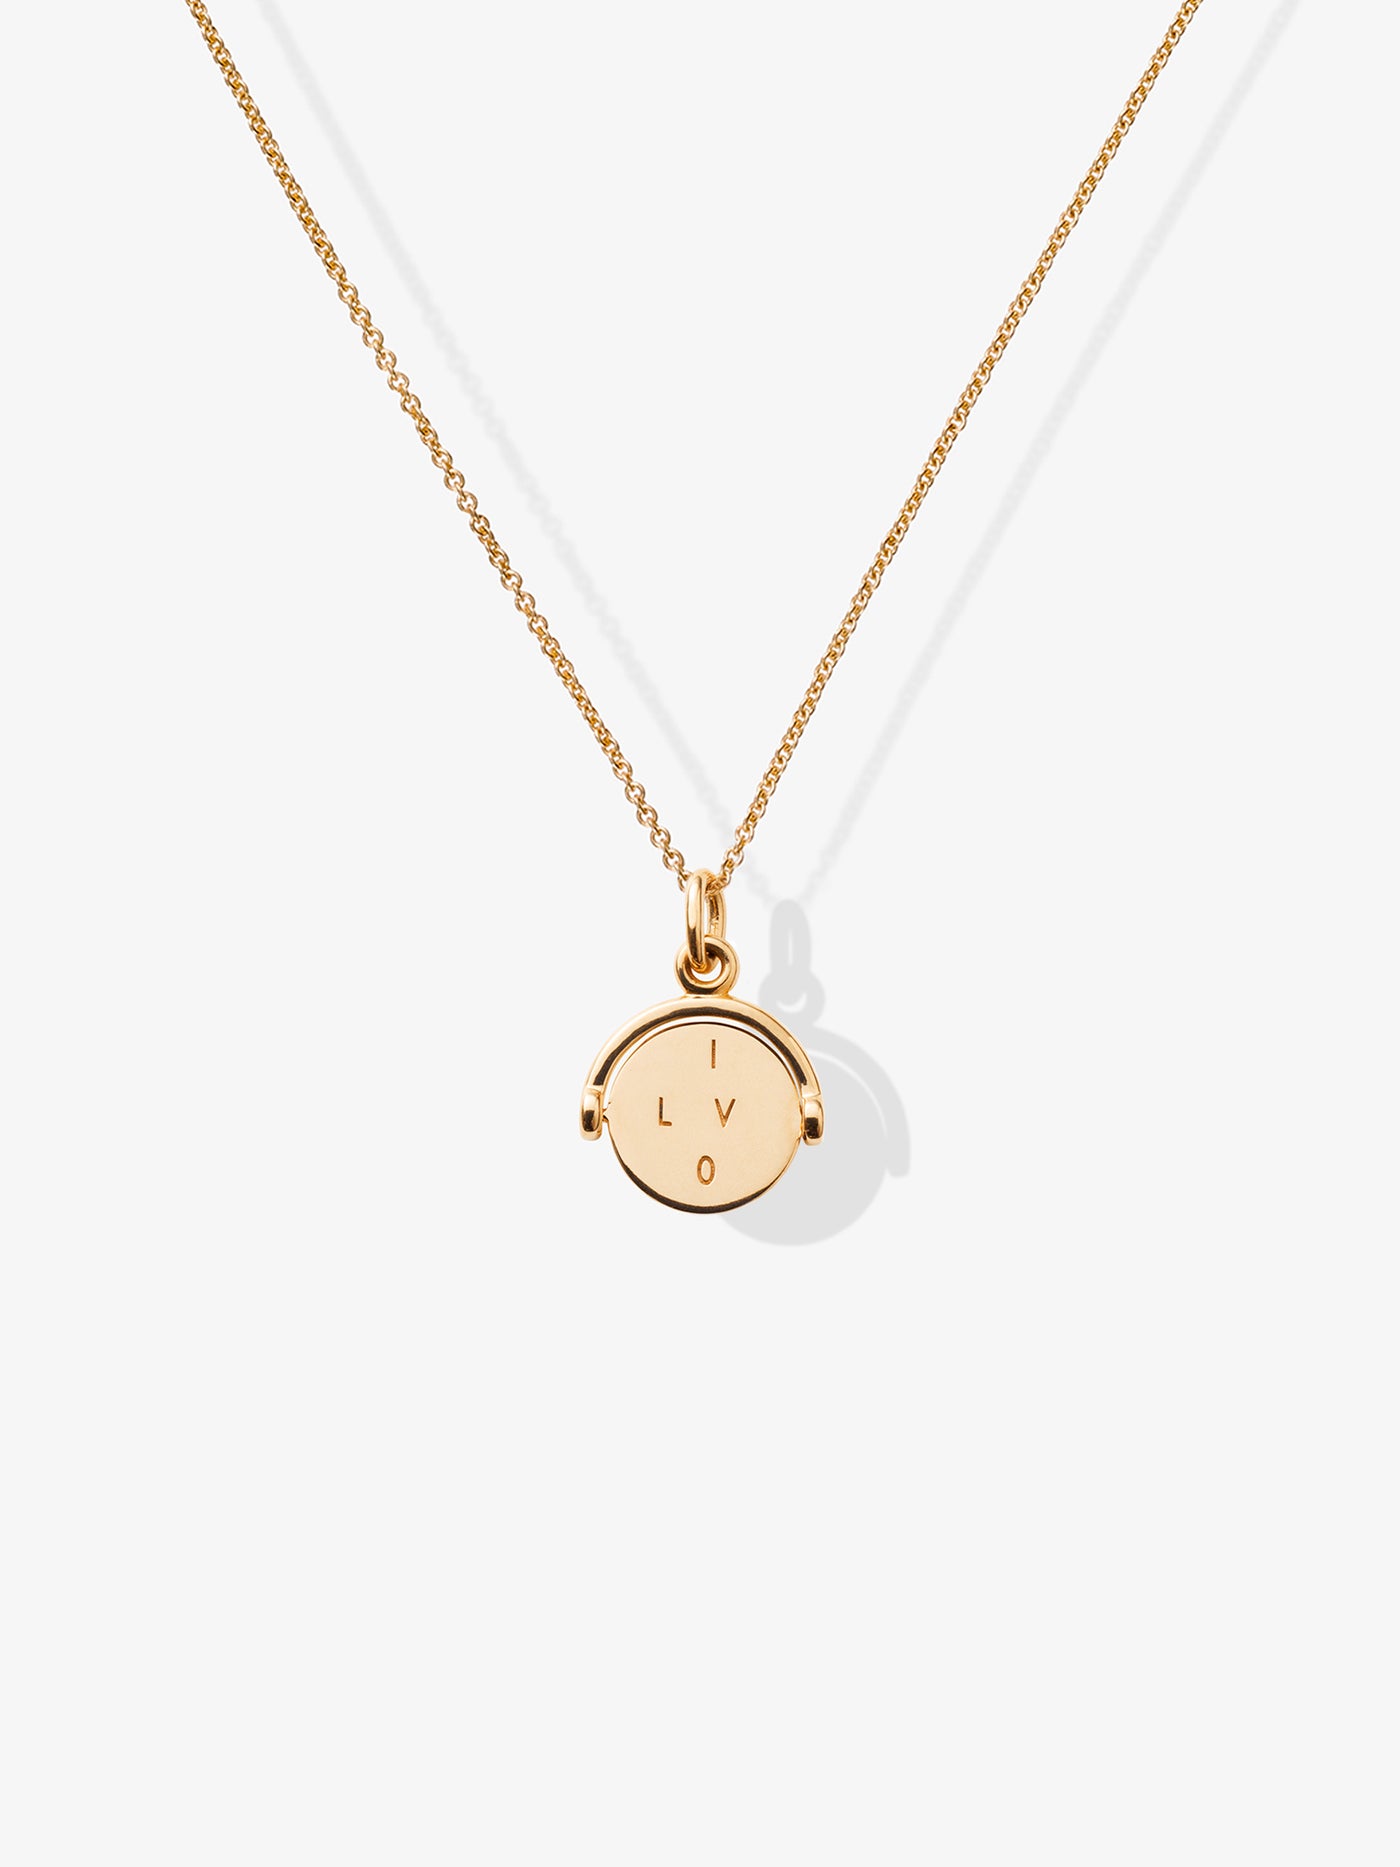 I Love You Necklace in 18k Gold